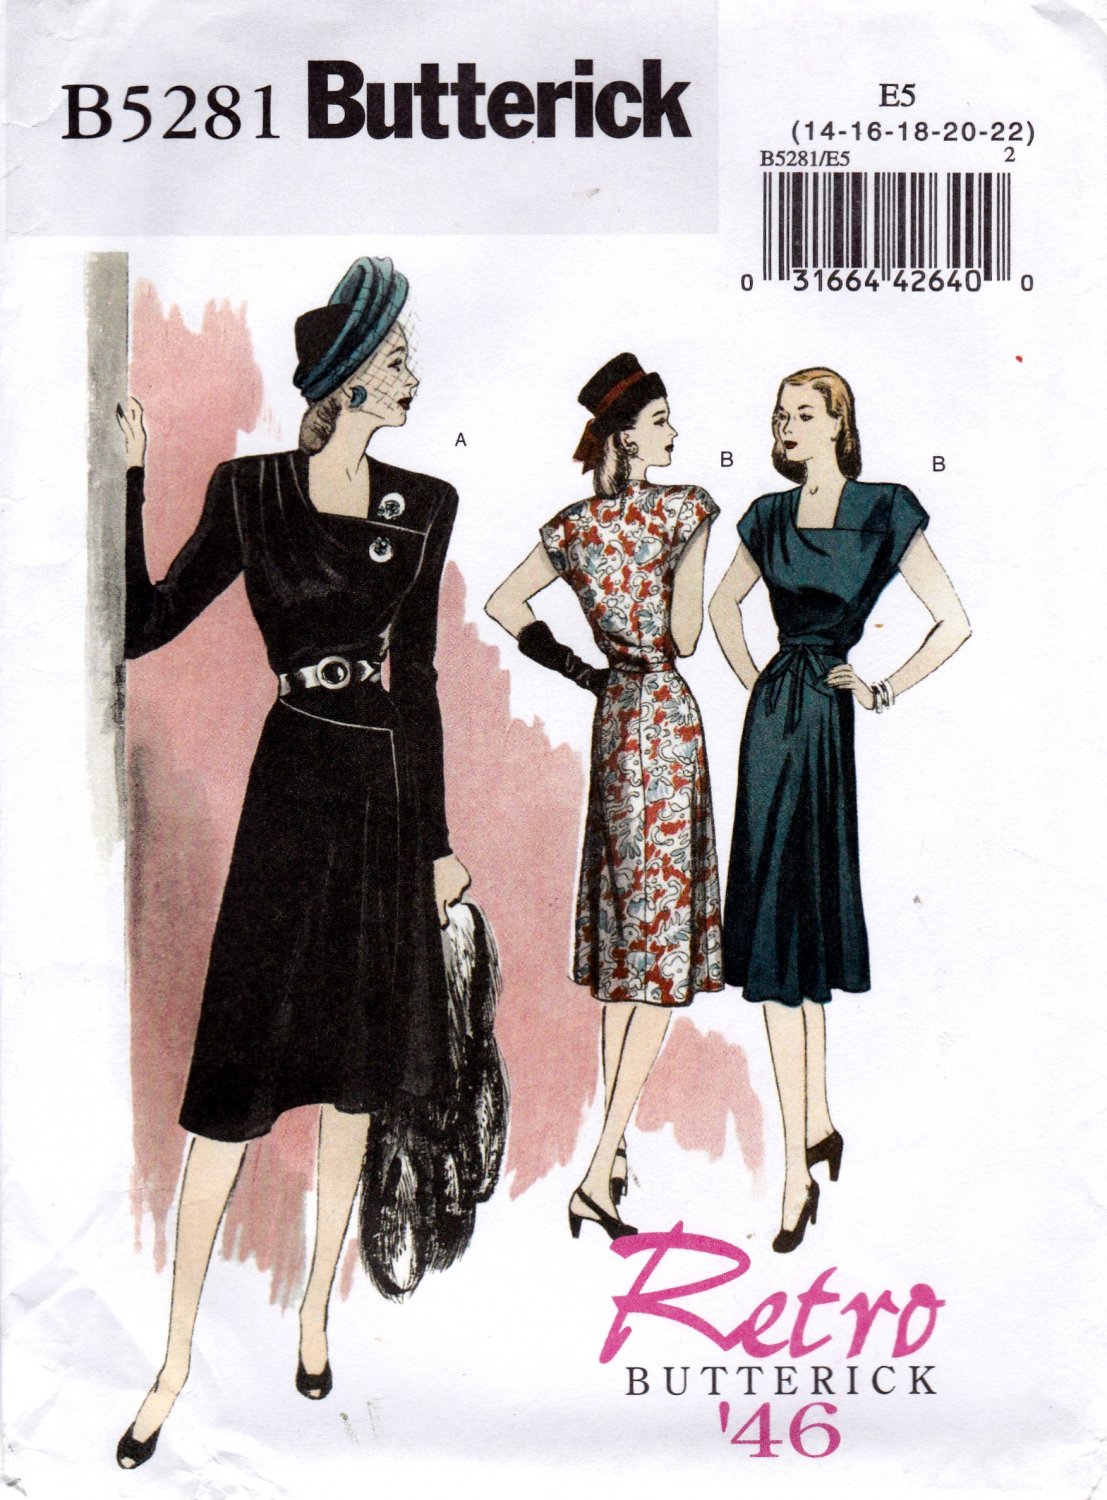 Butterick B5281 5281 Misses Dress and Belt Retro 1946 Design Sewing Pattern Sizes 14-16-18-20-22